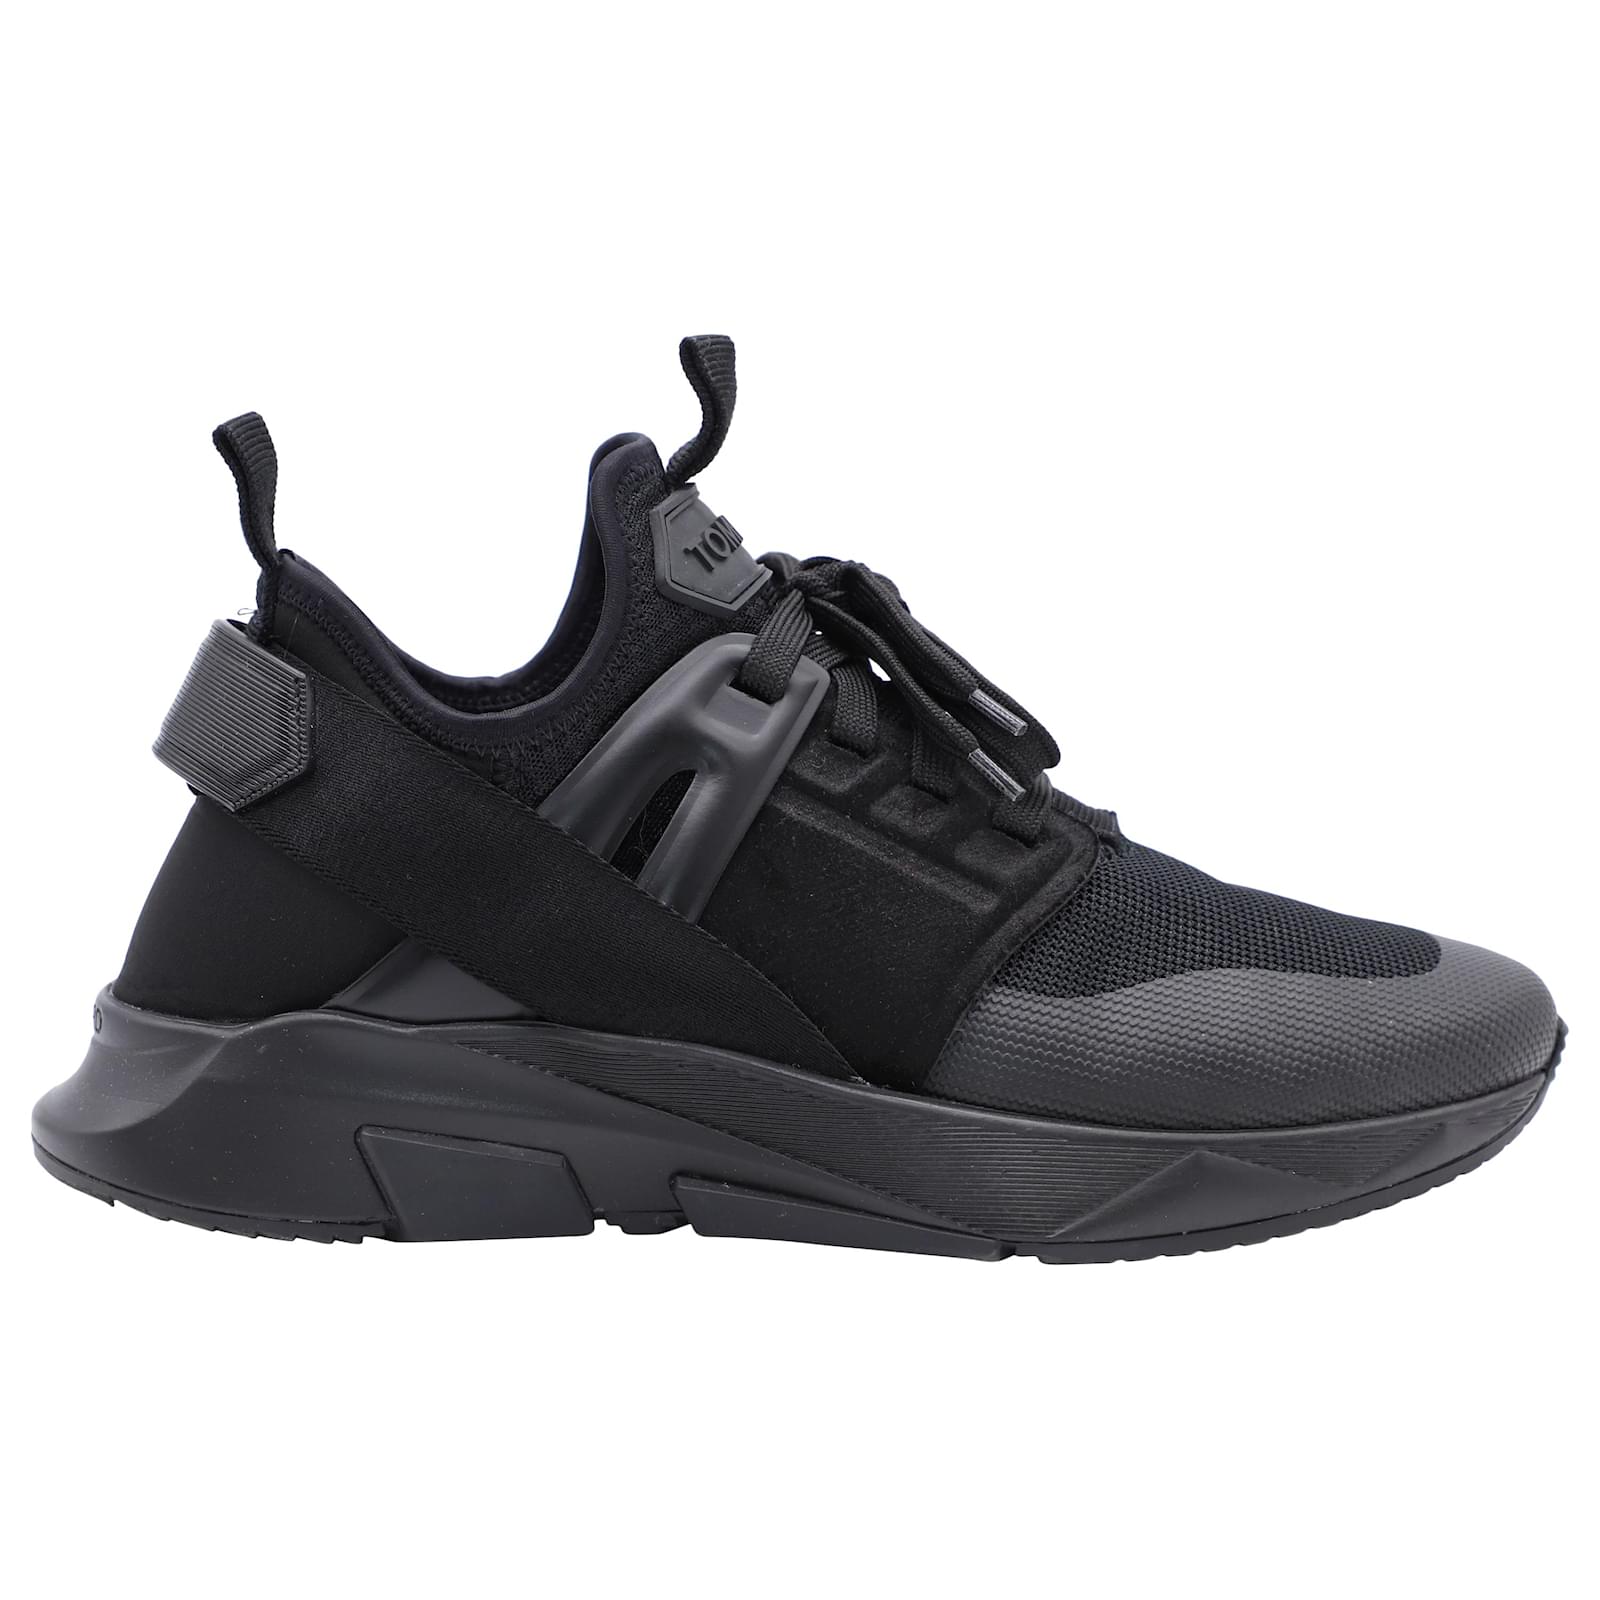 Tom Ford Jago Sneakers in Black calf leather Leather  - Joli  Closet